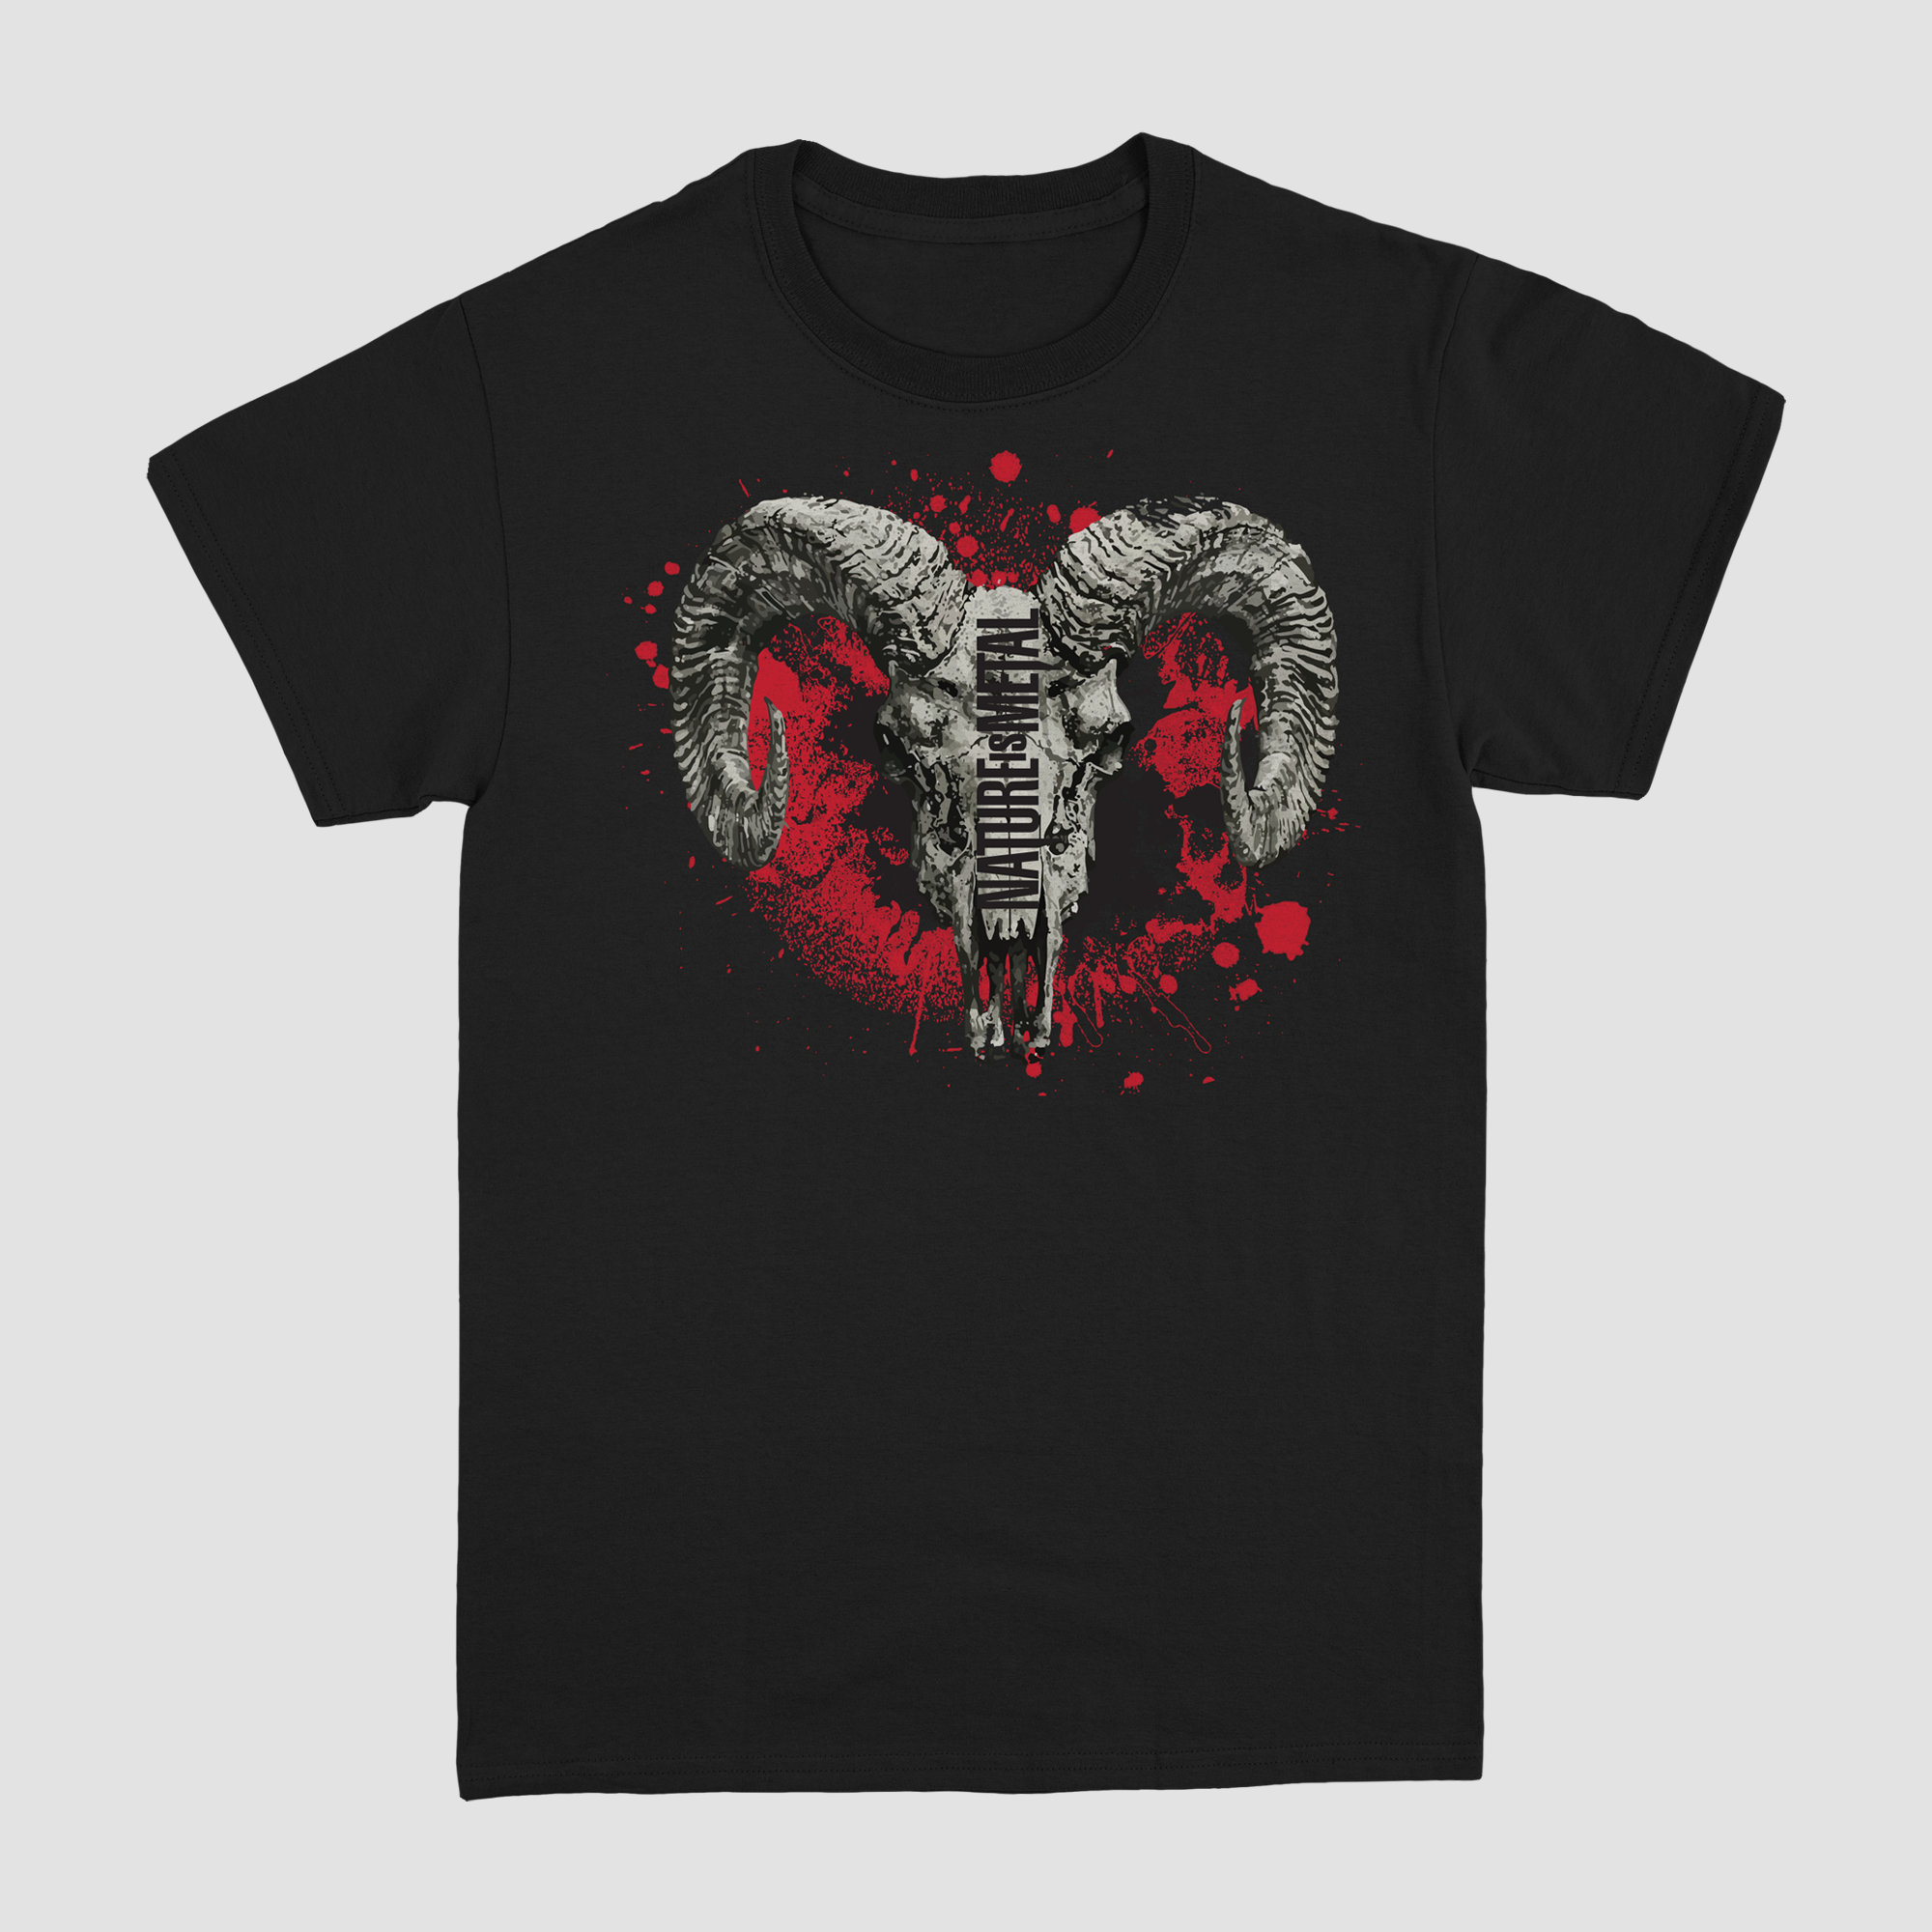 Blood Ram "Limited Edition" T-Shirt